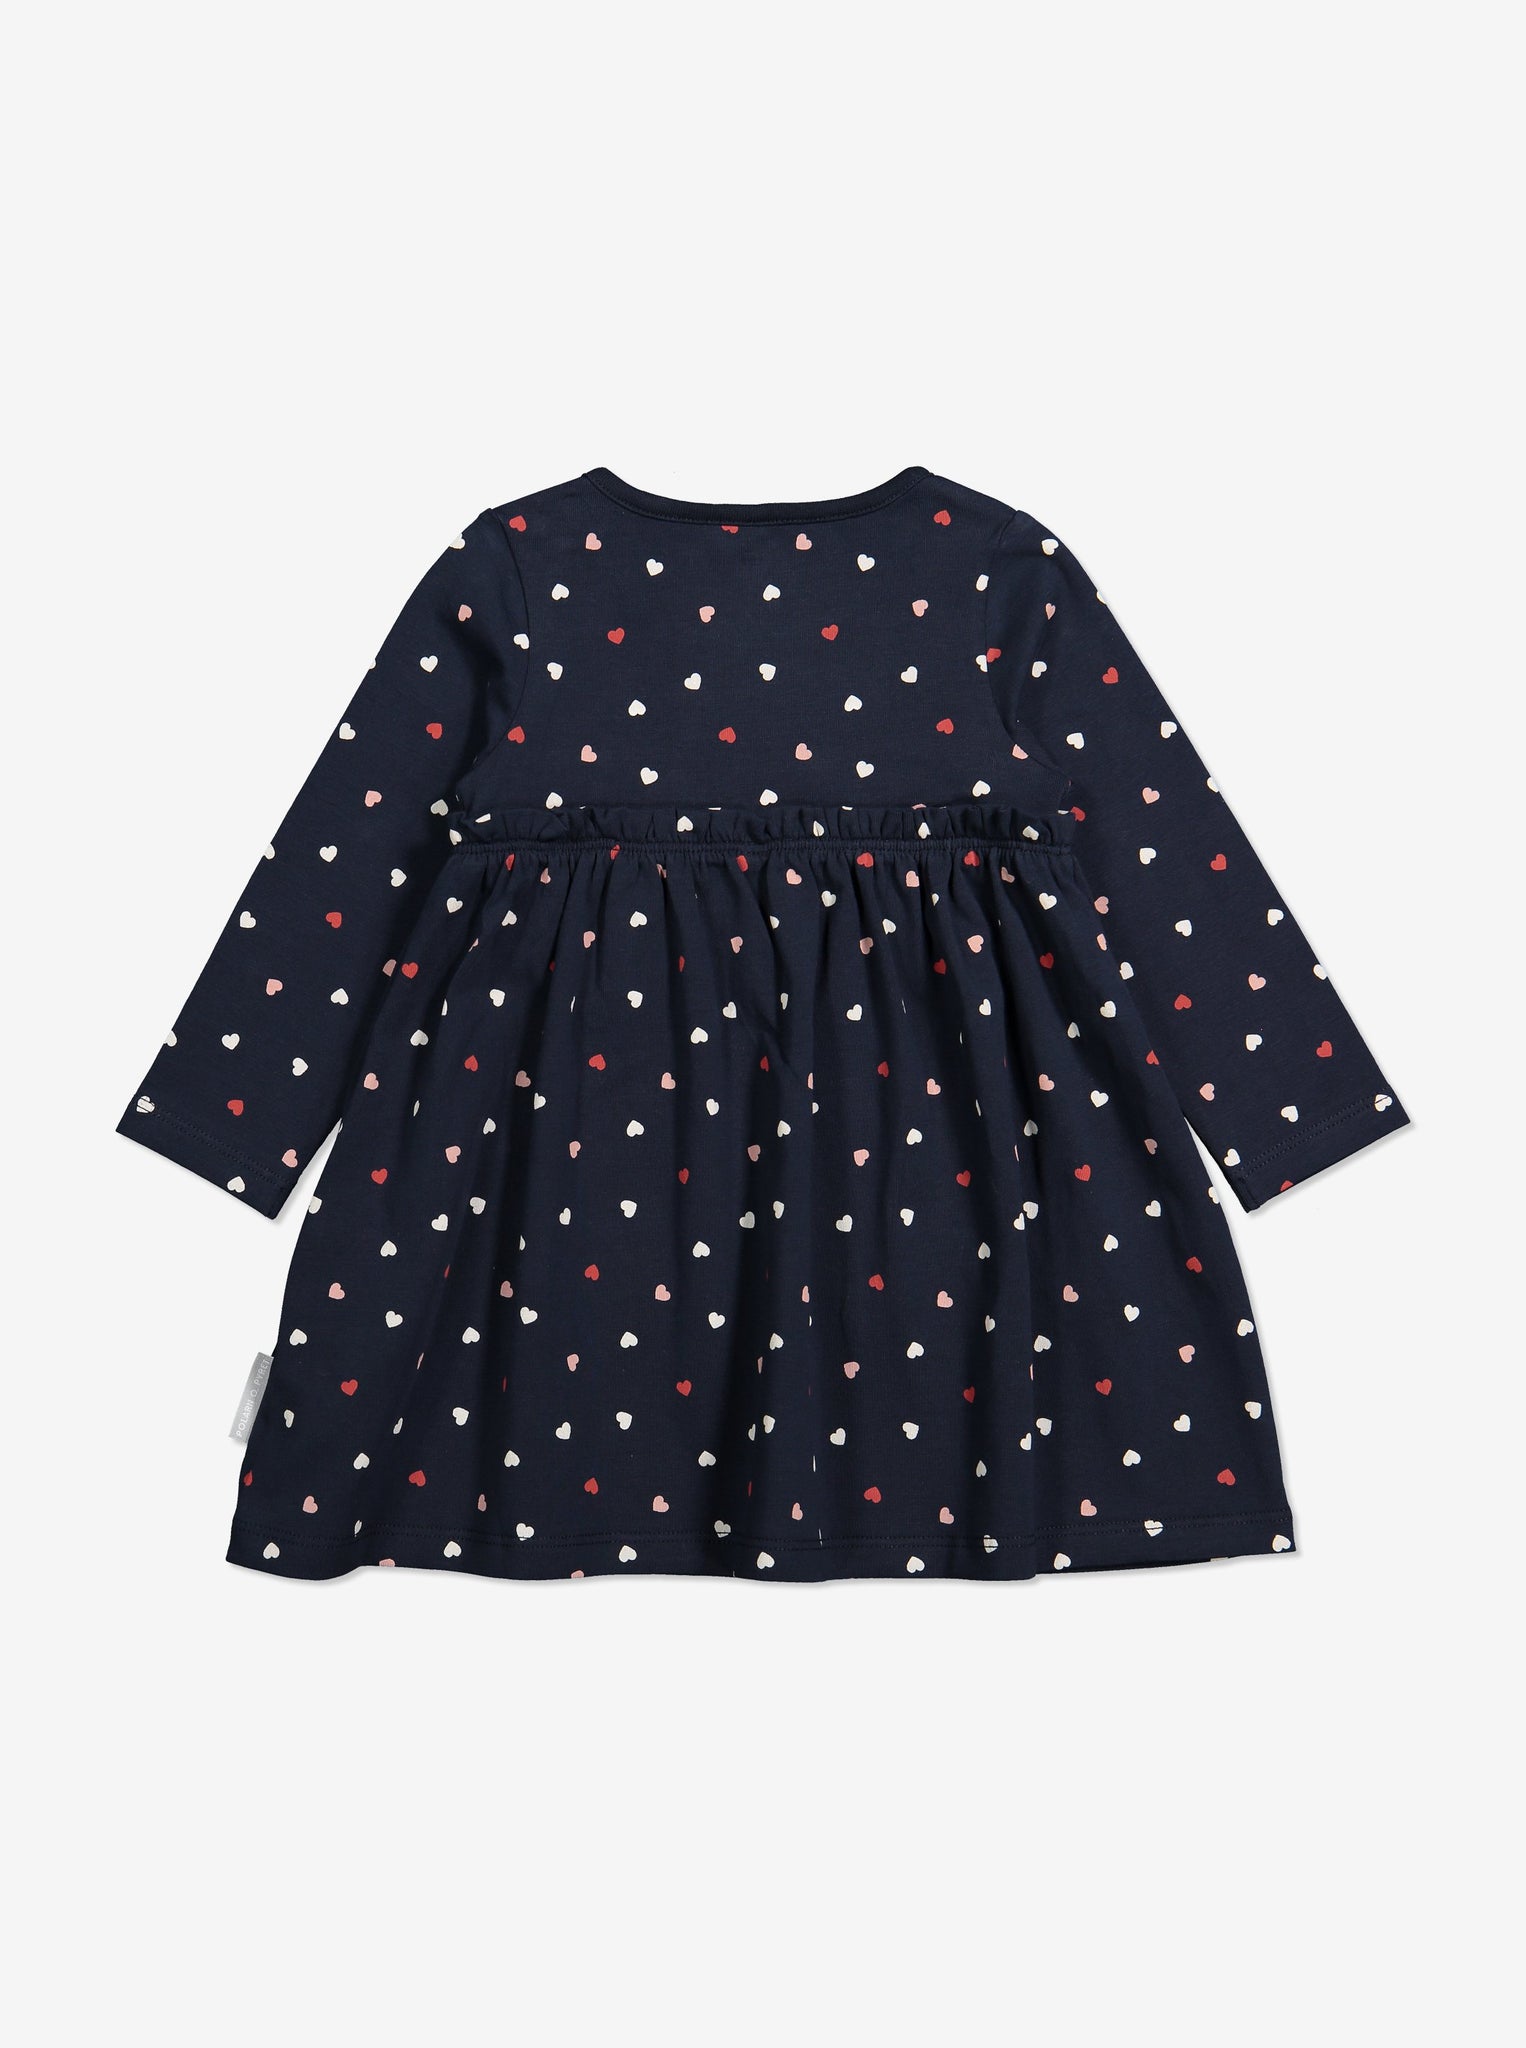 Spotty Babies Dress, Ethical Baby Clothes 